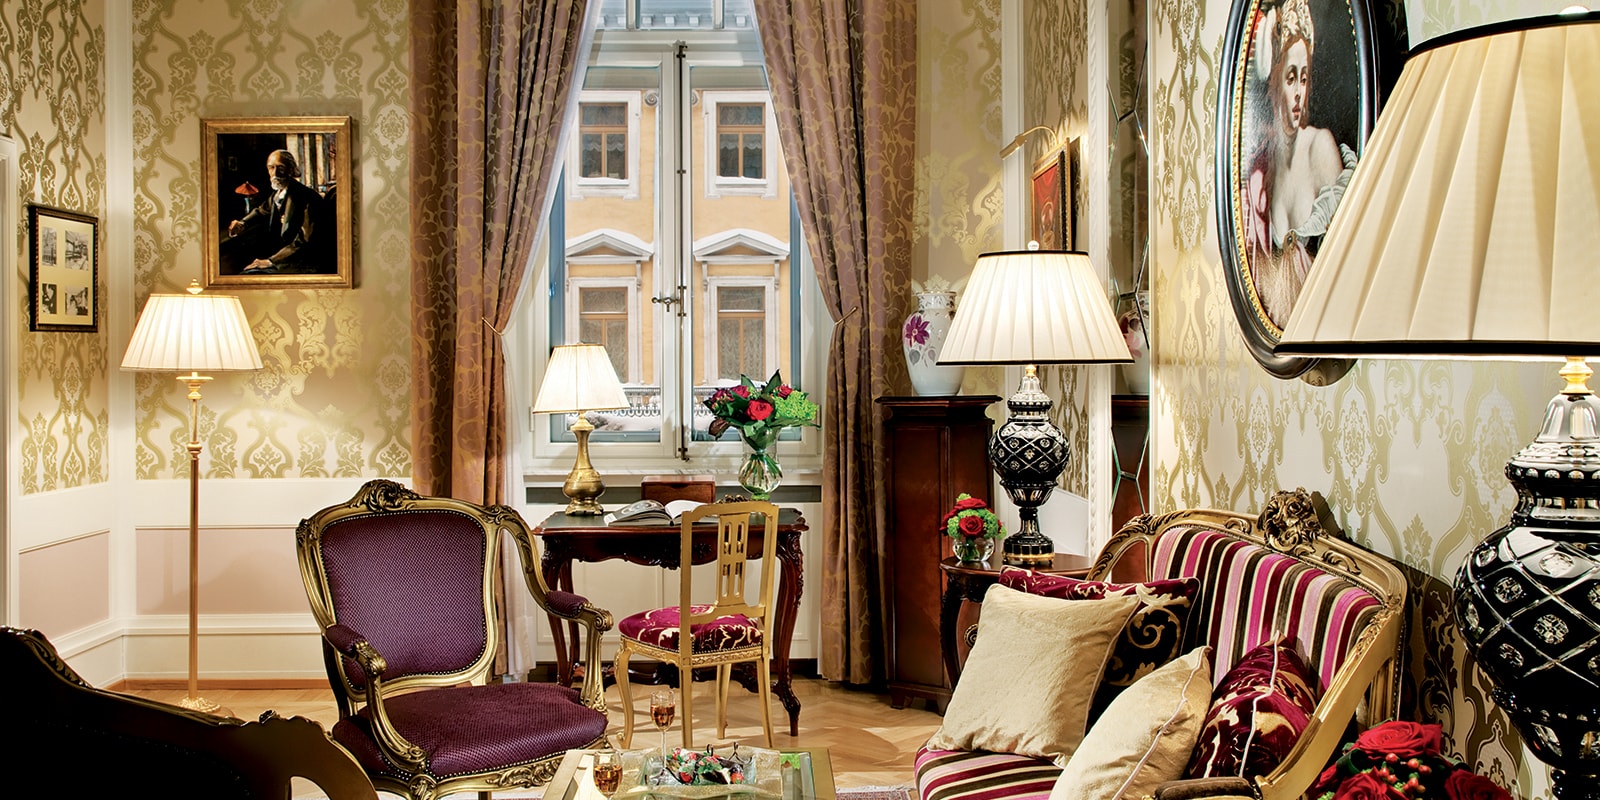 The Belmond Grand Hotel Europe in St. Petersburg — The very